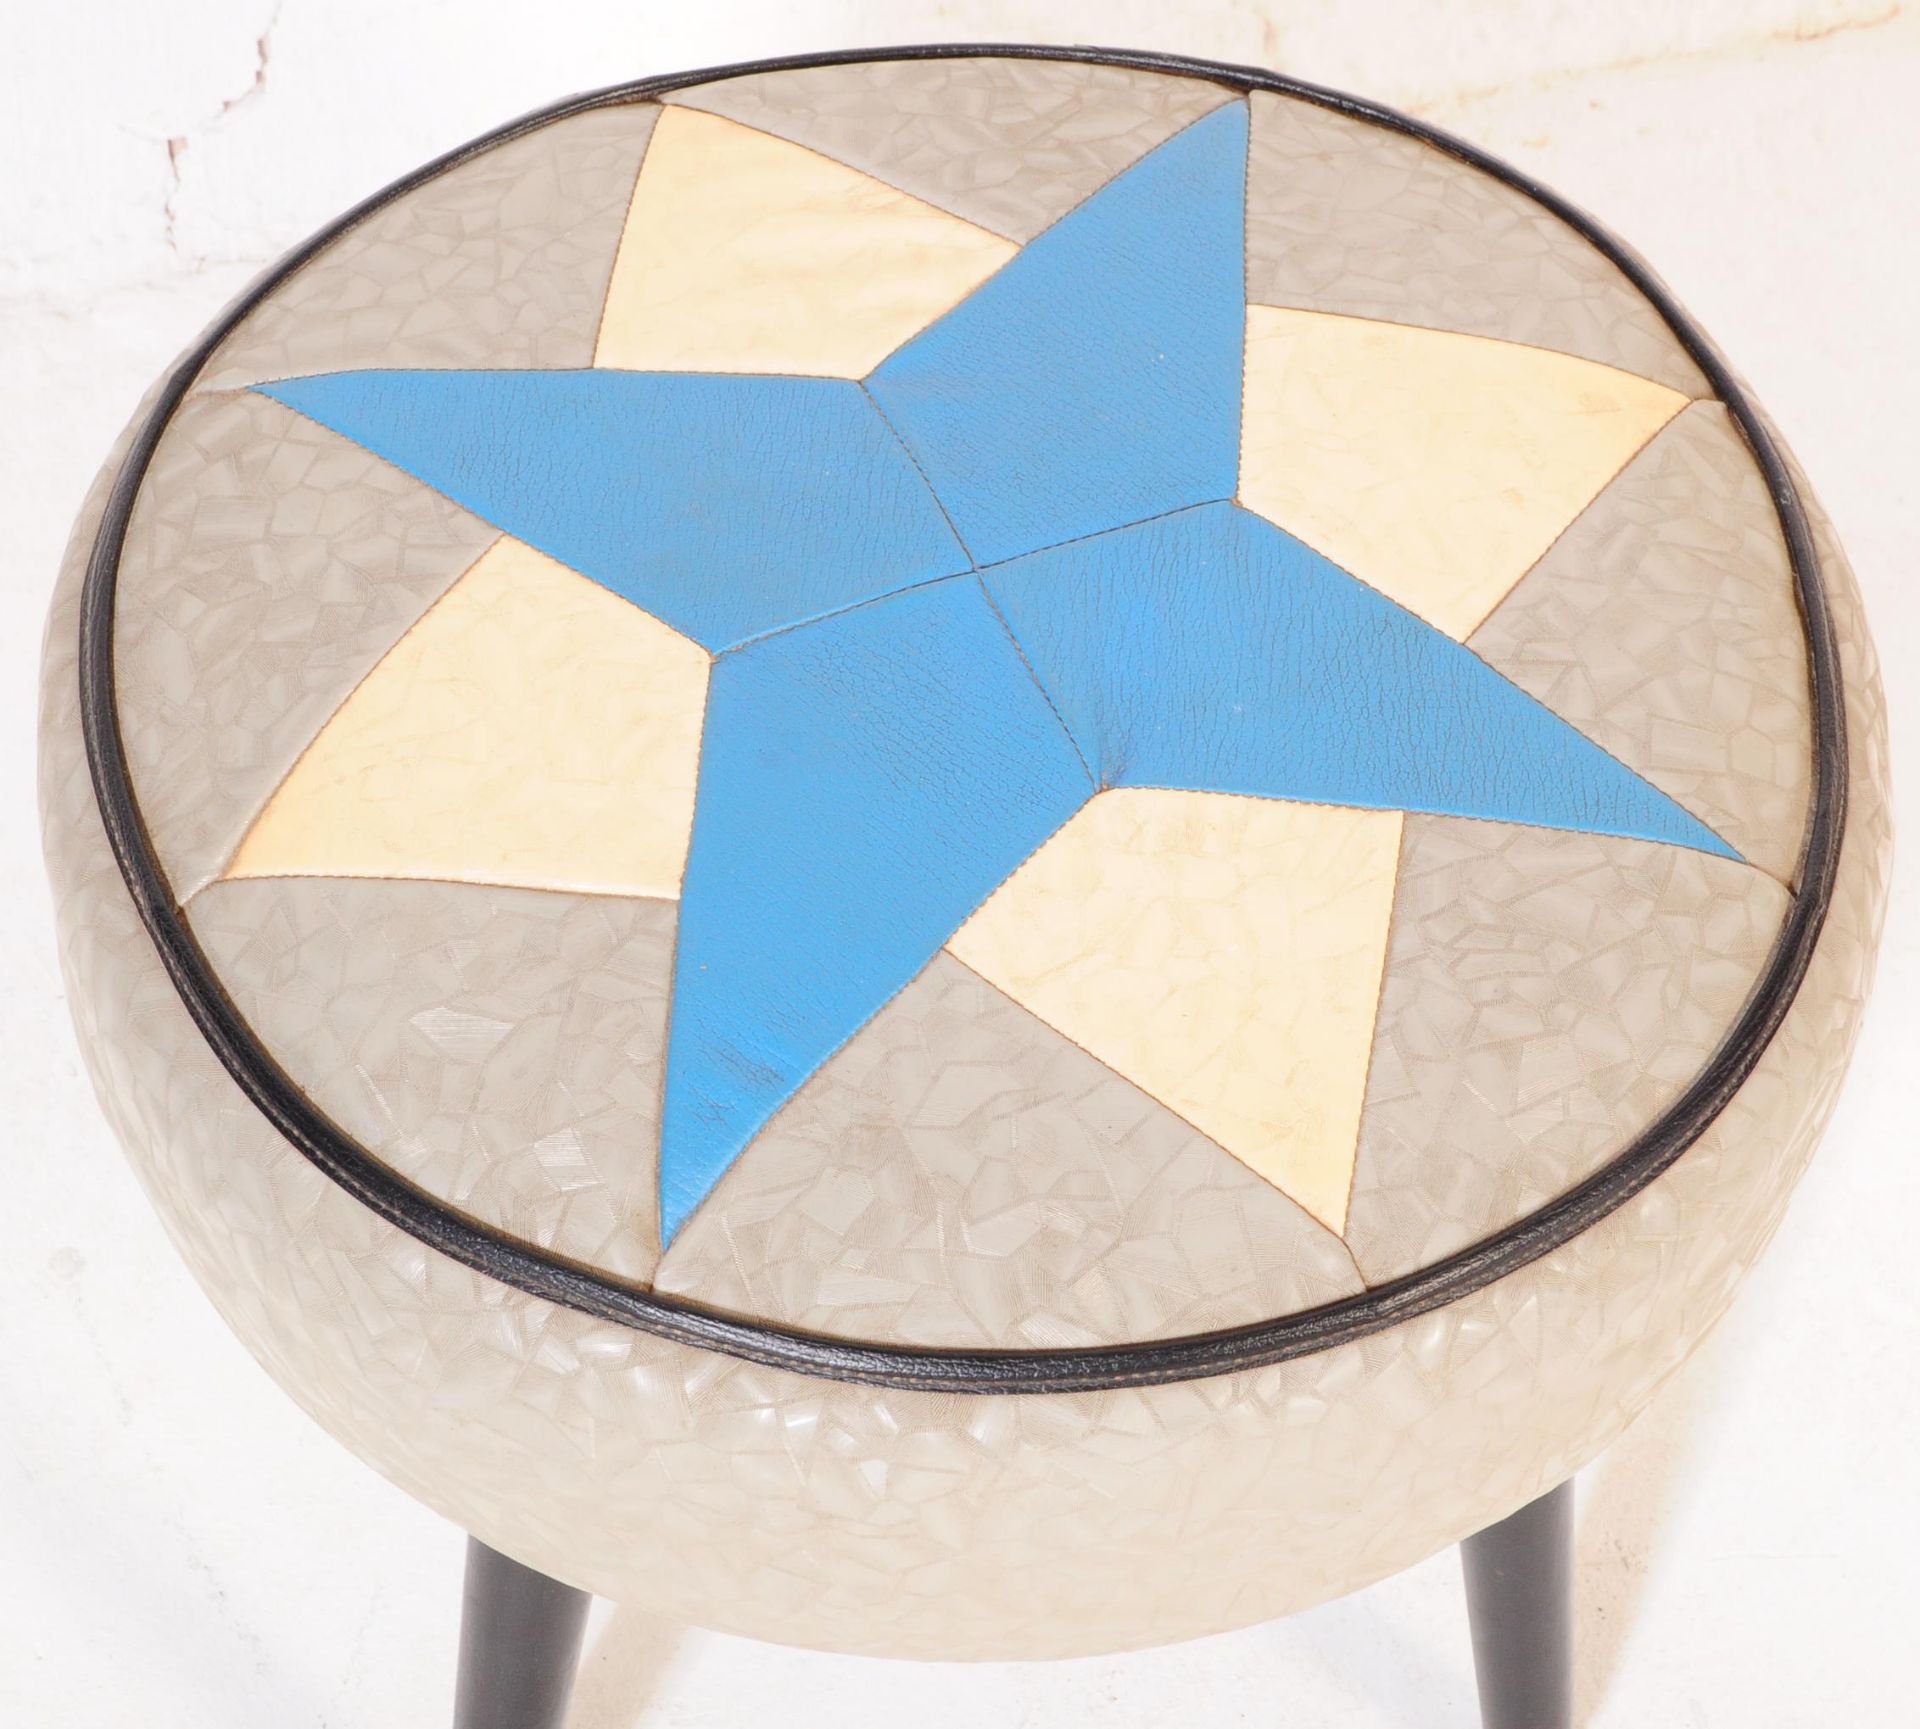 A VINTAGE RETRO 1970'S VINYL POUF FOOT STOOL BY SHERBOURNE - Image 3 of 4